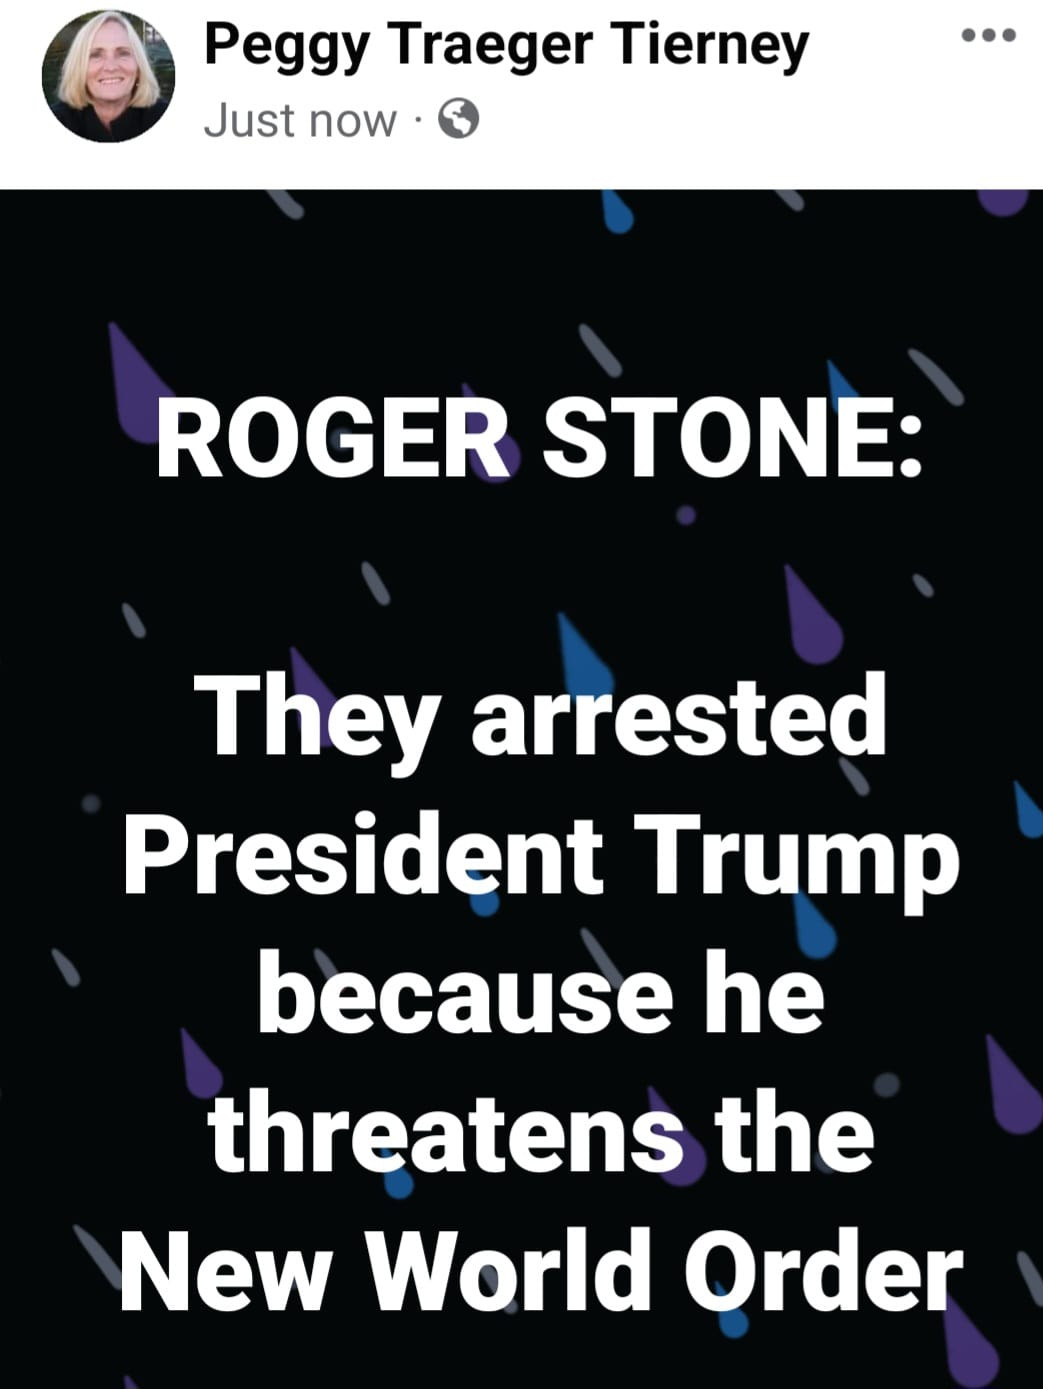 May be an image of 1 person and text that says 'Peggy Traeger Tierney Just now ROGER STONE: They arrested President Trump because he threatens the New World Order'